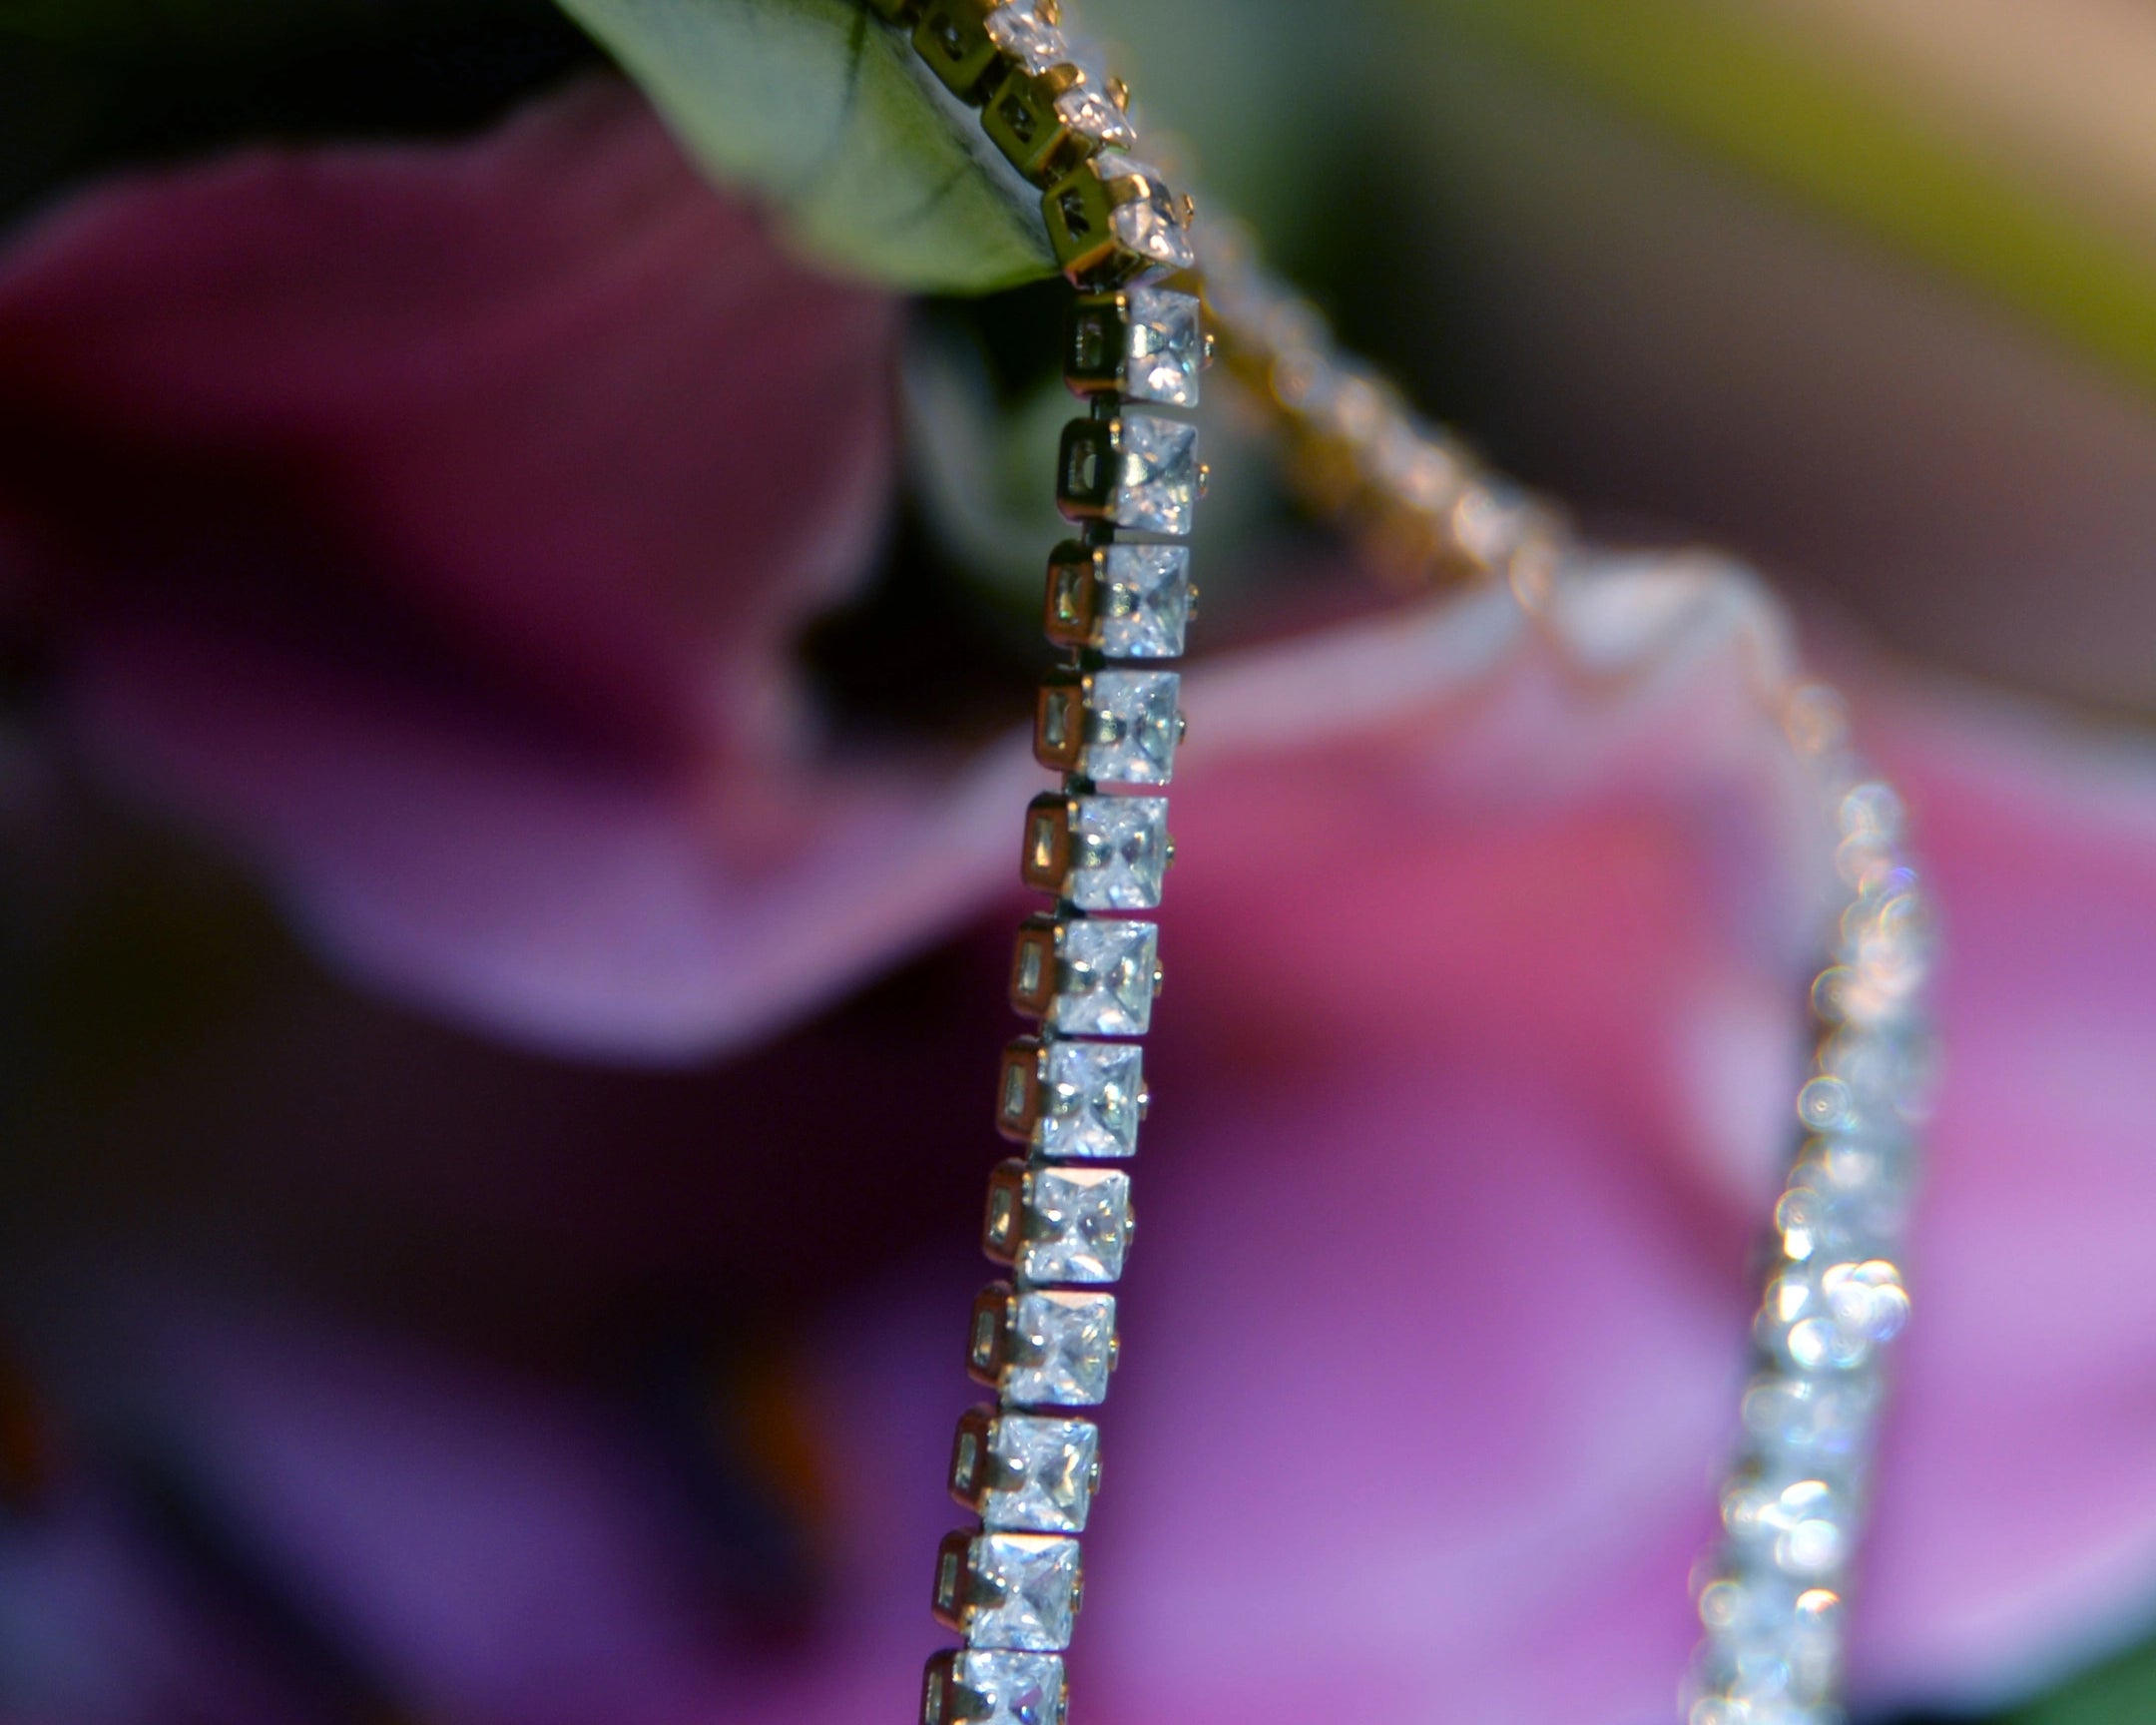 Artistic image of Aria's Tennis Chain Necklace on flowers